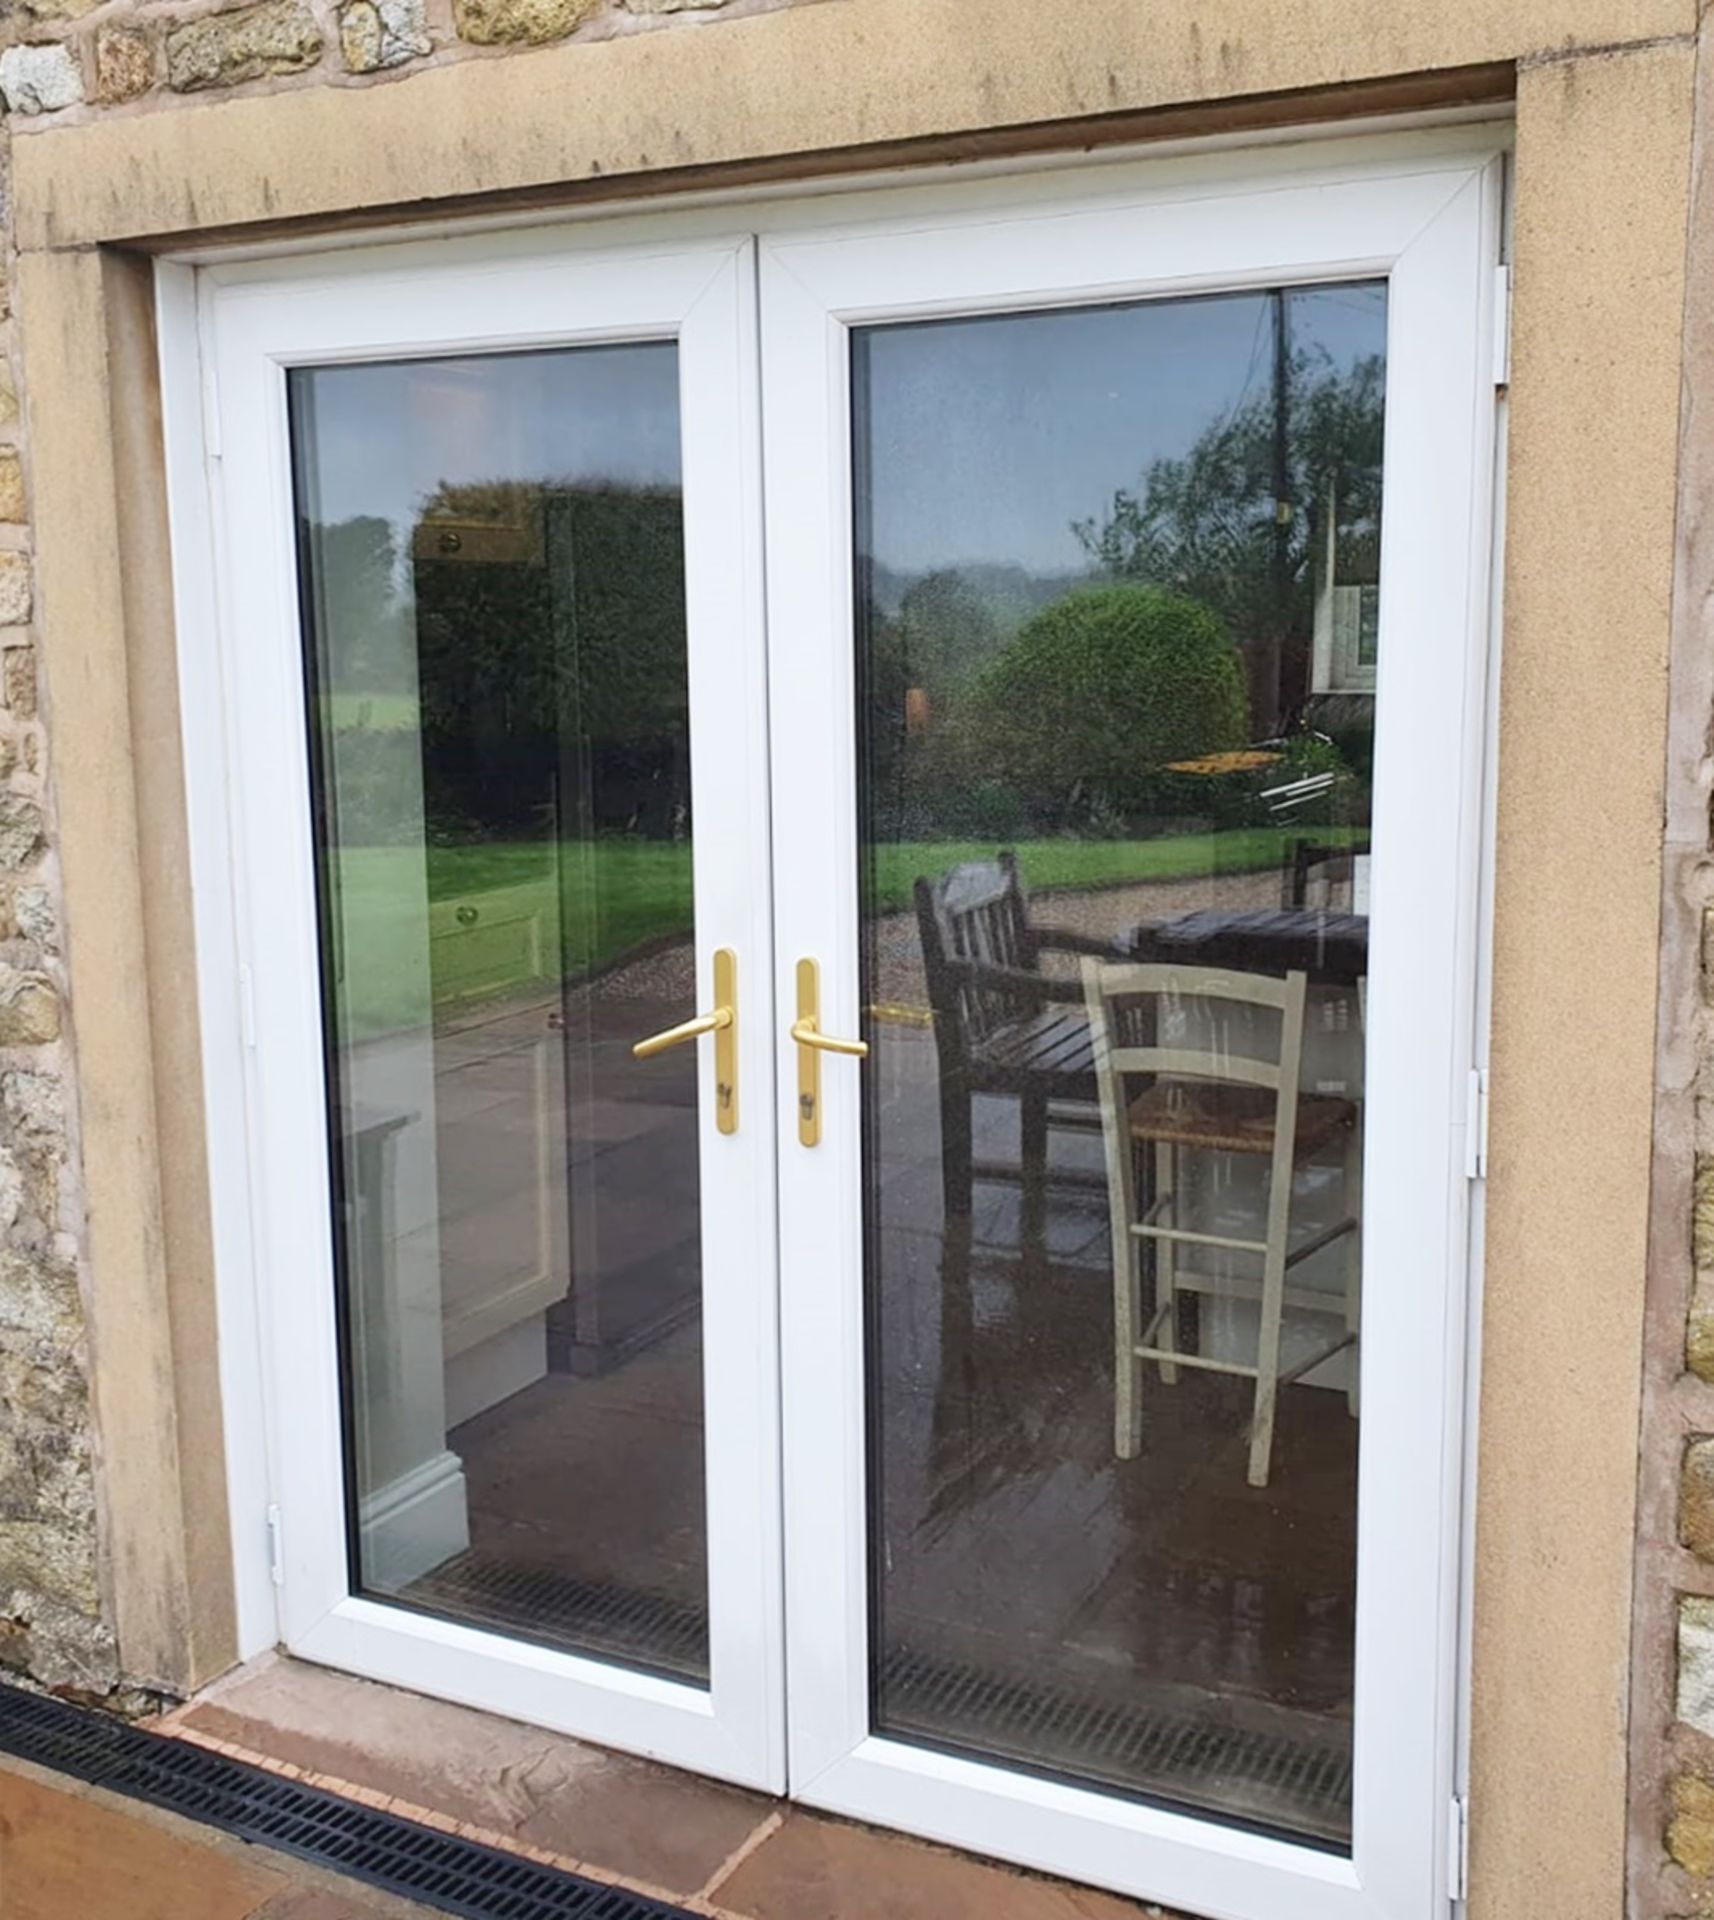 1 x Set of White PVC Double Glazed Patio Doors With Safeware Lock, Keys and Brass Handles -